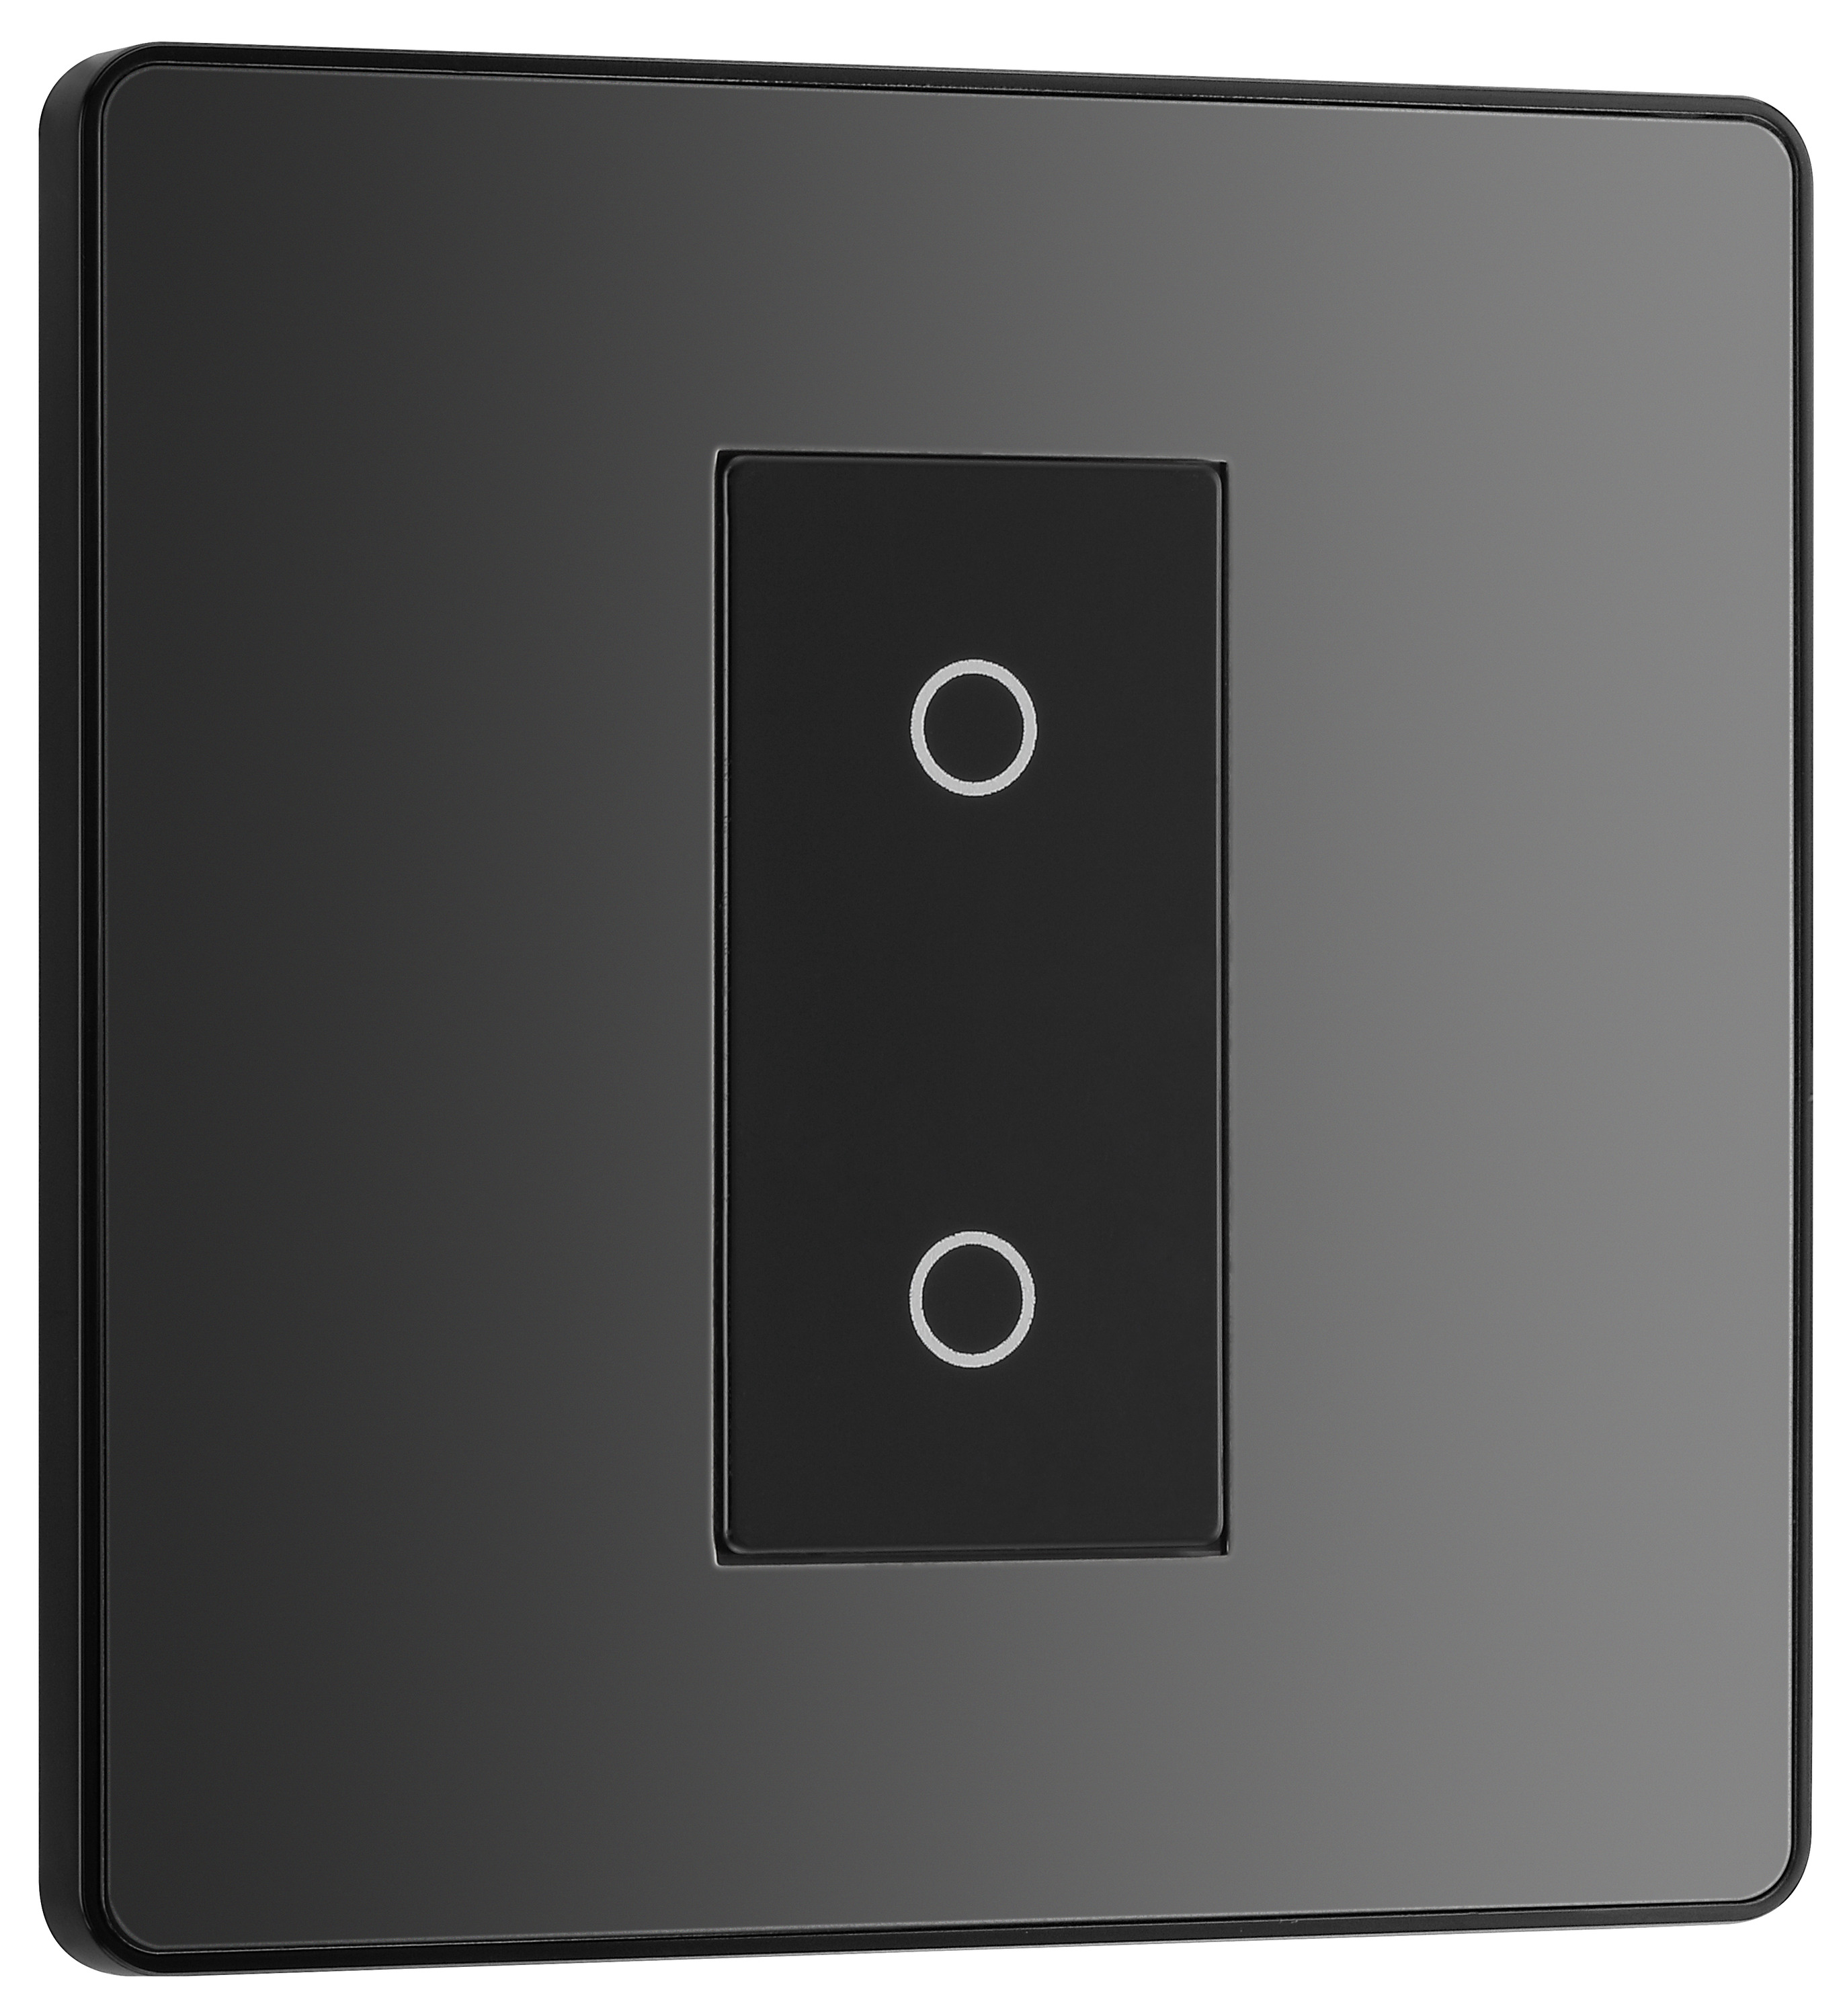 Image of BG Evolve Master Black Chrome 2 Way Single Touch Dimmer Switch - 200W